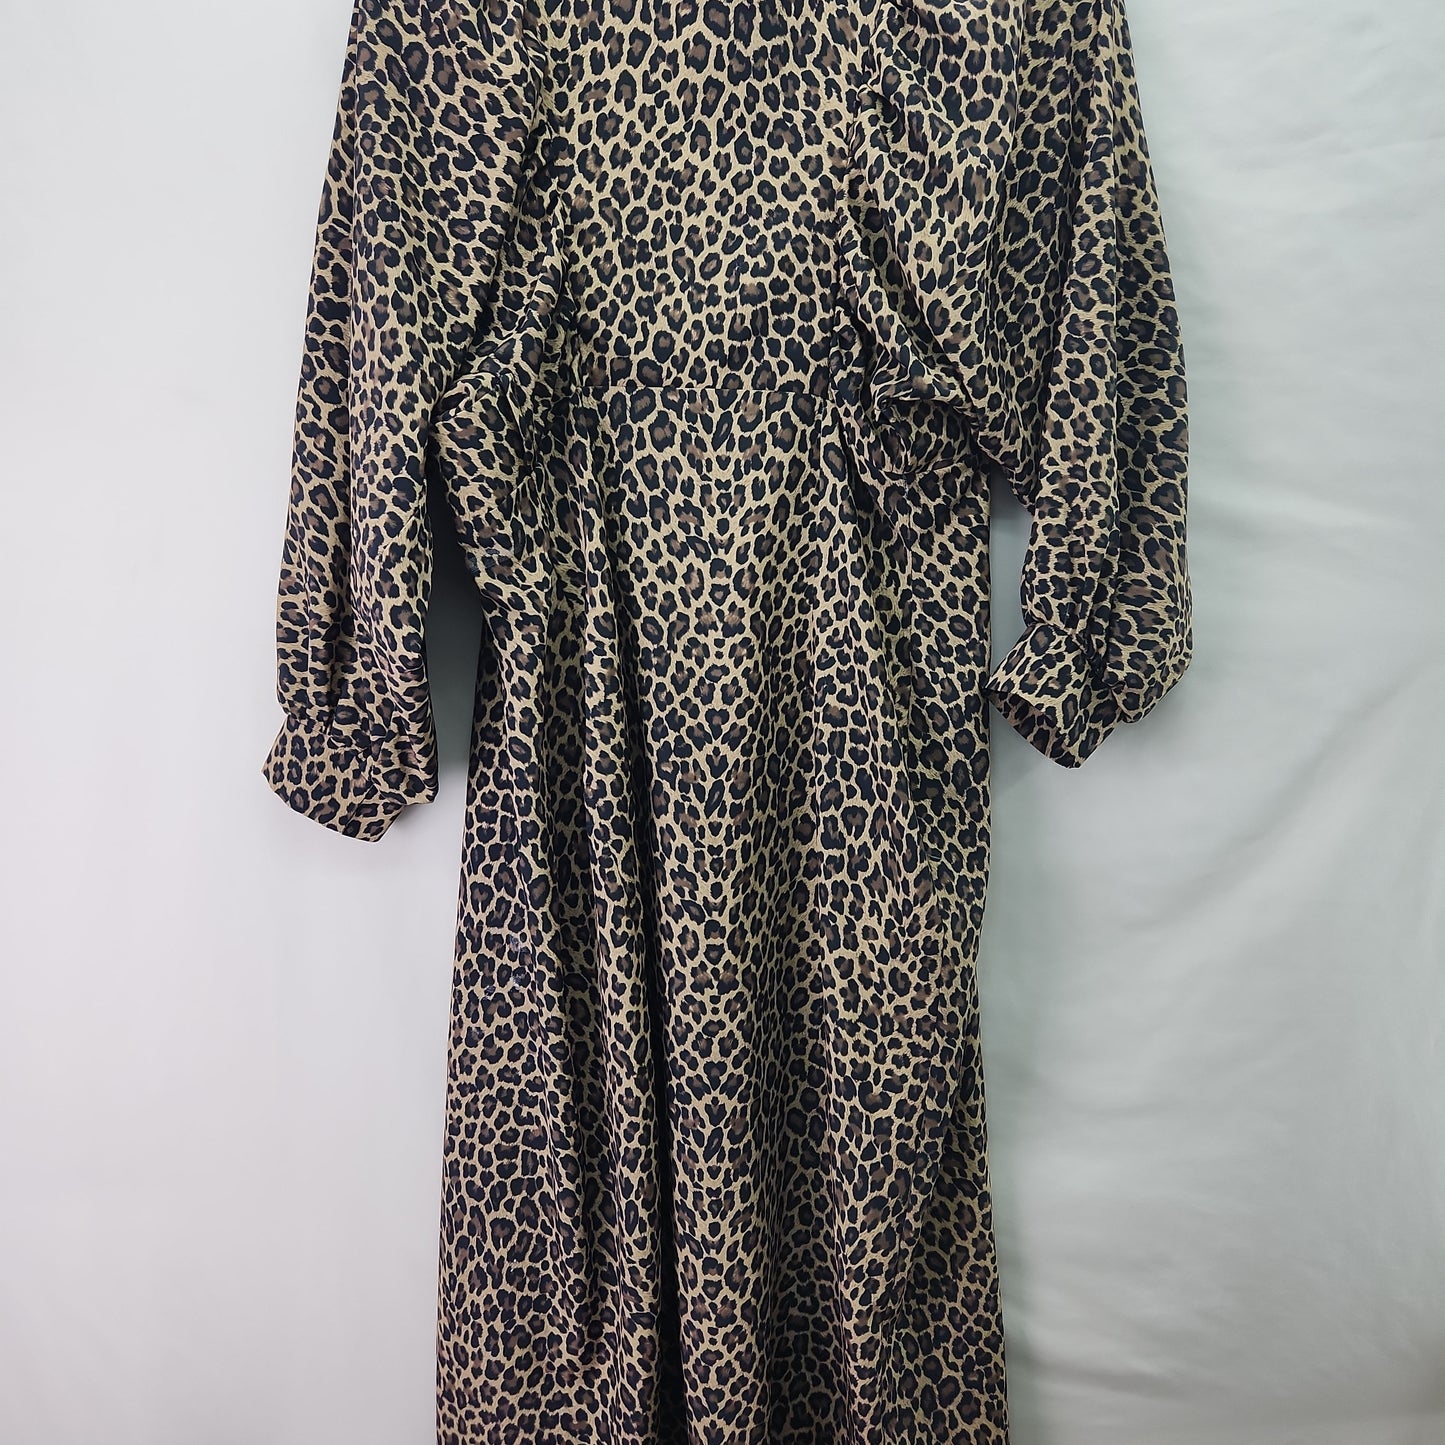 Never Fully Dressed Beach Cover Up Dress Leopard Print - 6